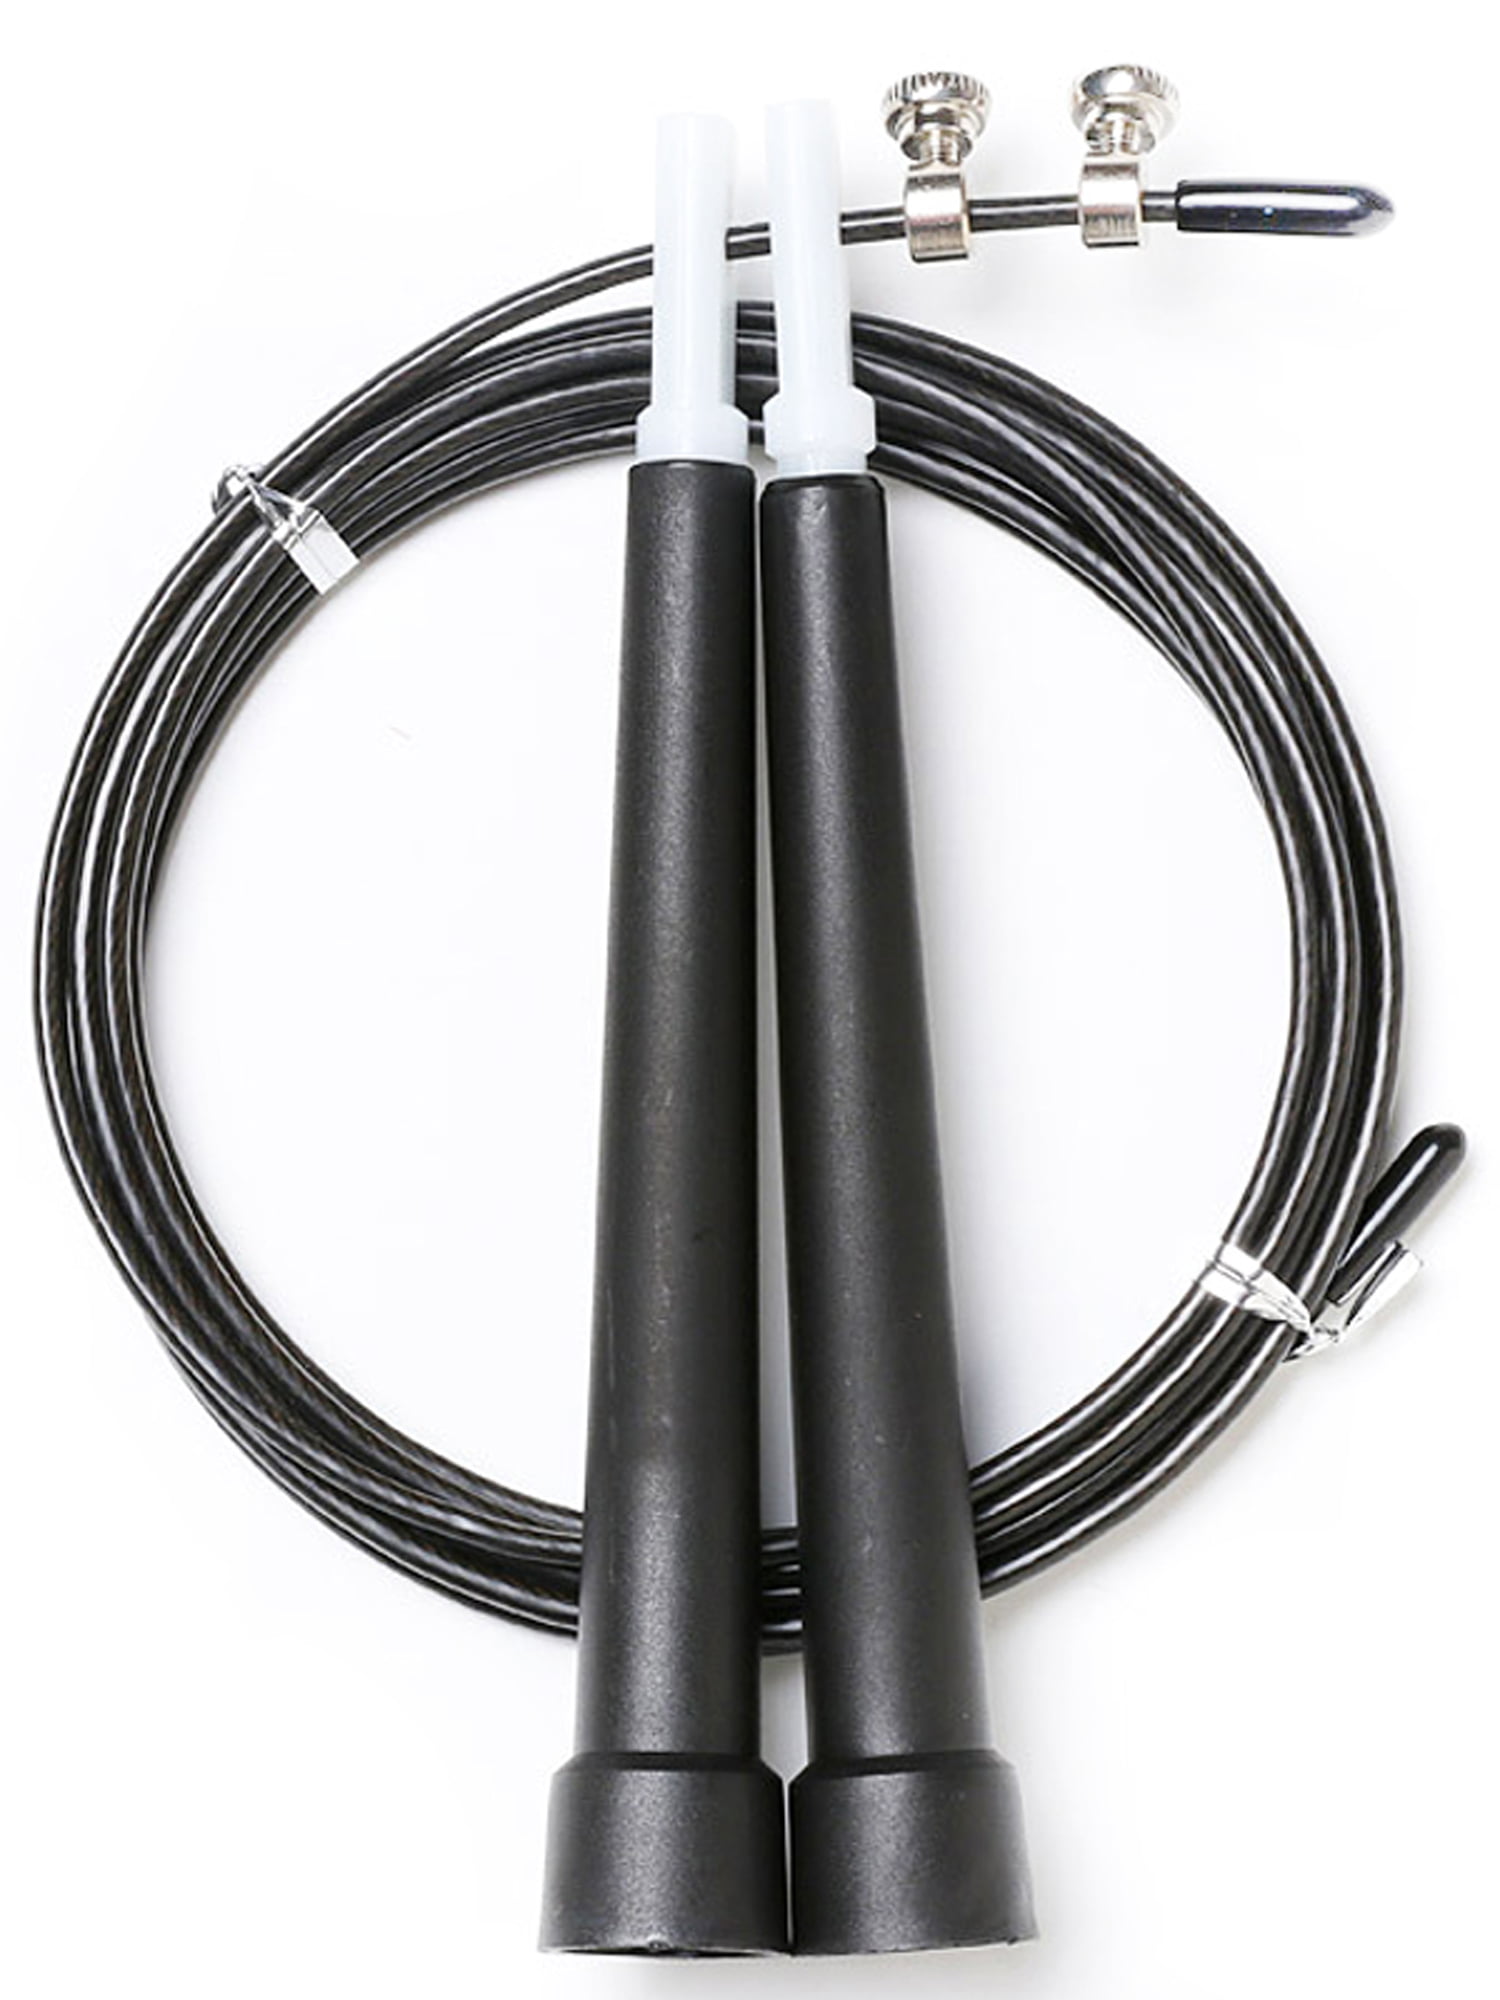 Speed Skipping Rope Adjustable Steel Cable Fitness Exercise Crossfit Boxing H2 